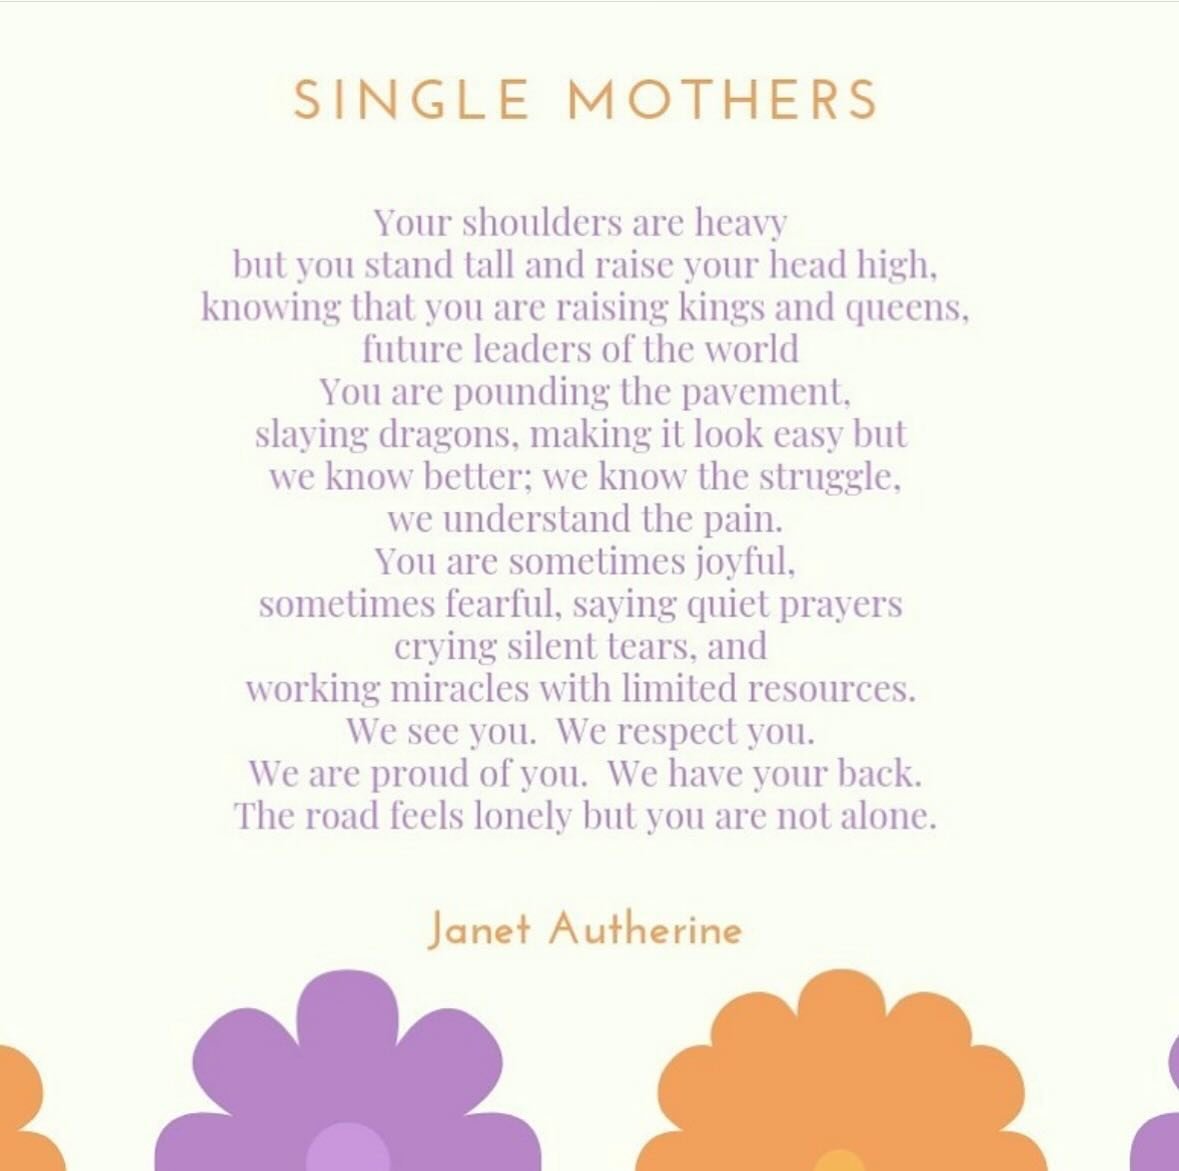 Sending Mother&rsquo;s Day blessings to all single mothers. We understand the struggle. You are sometimes joyful, sometimes fearful, saying quiet prayers, crying silent tears, working miracles with limited resources. We see you, we respect you, we ar